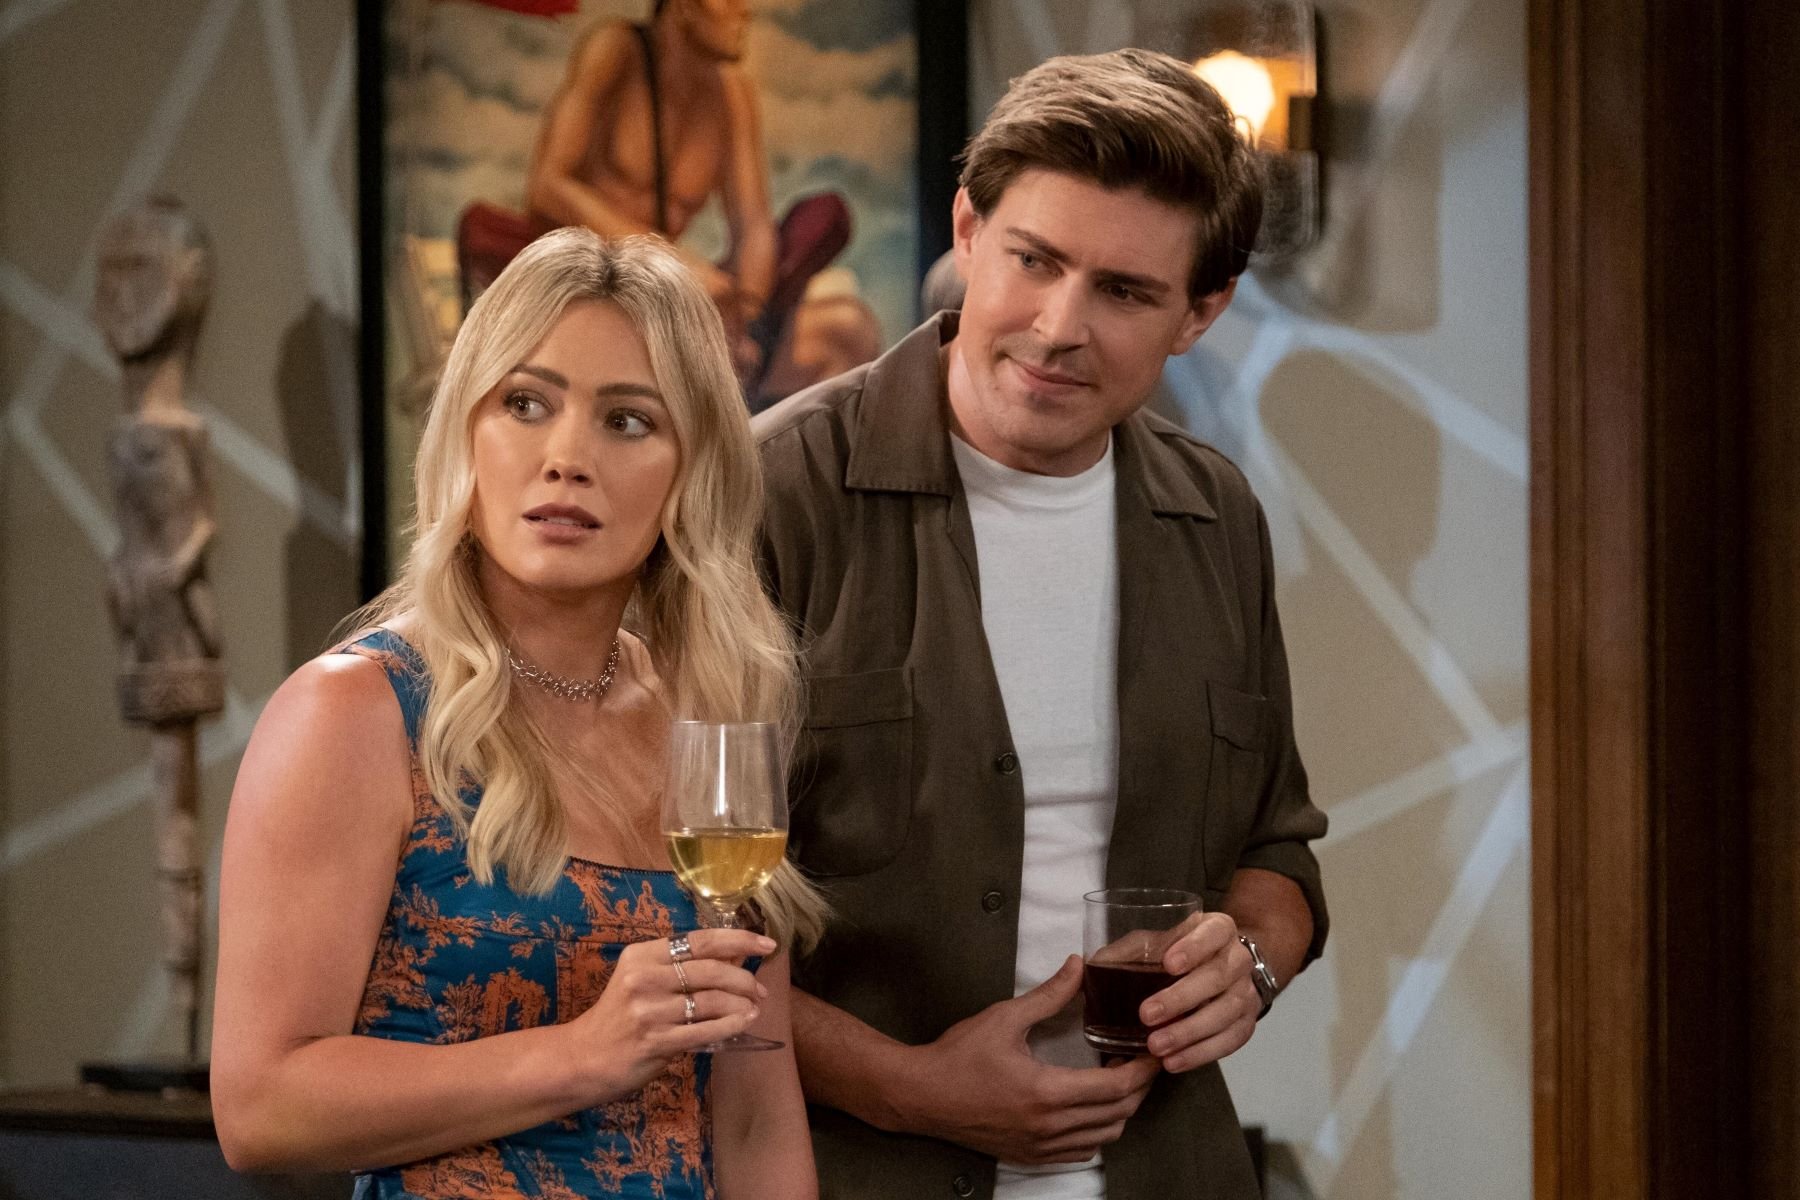 Hilary Duff as Sophie and Chris Lowell as Jesse in 'How I Met Your Father' Season 2 Episode 3, 'The Reset Button.' Sophie wears a blue and orange tank top. Jesse wears a dark brown button-up shirt over a white shirt.